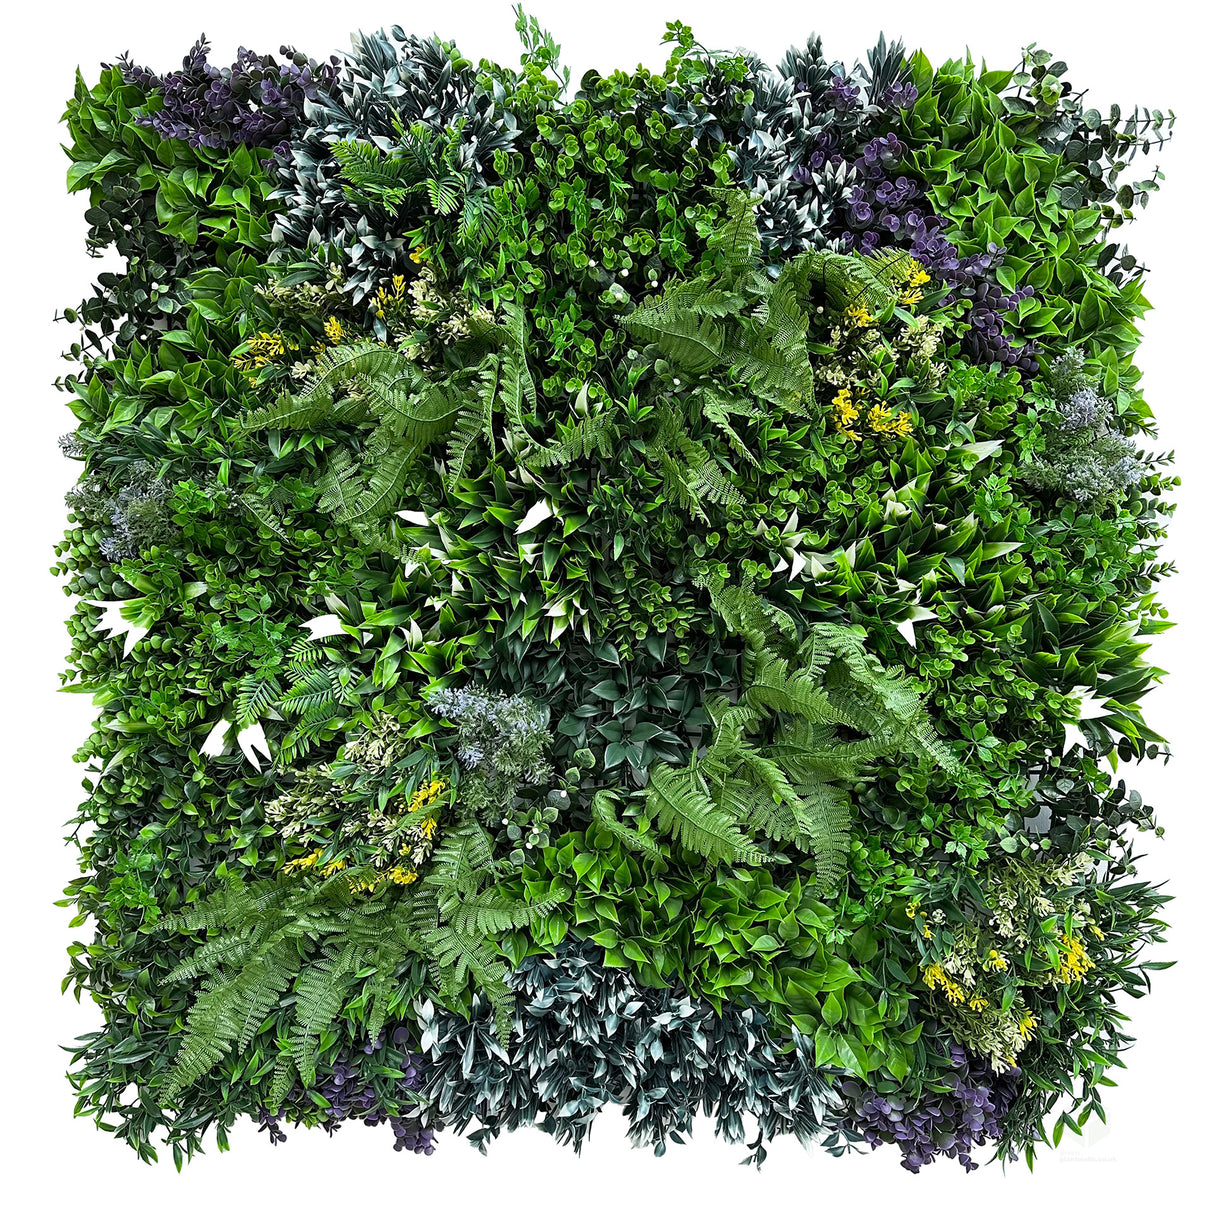 Artificial green wall 1m2 panel with mixed green, white and purple plants